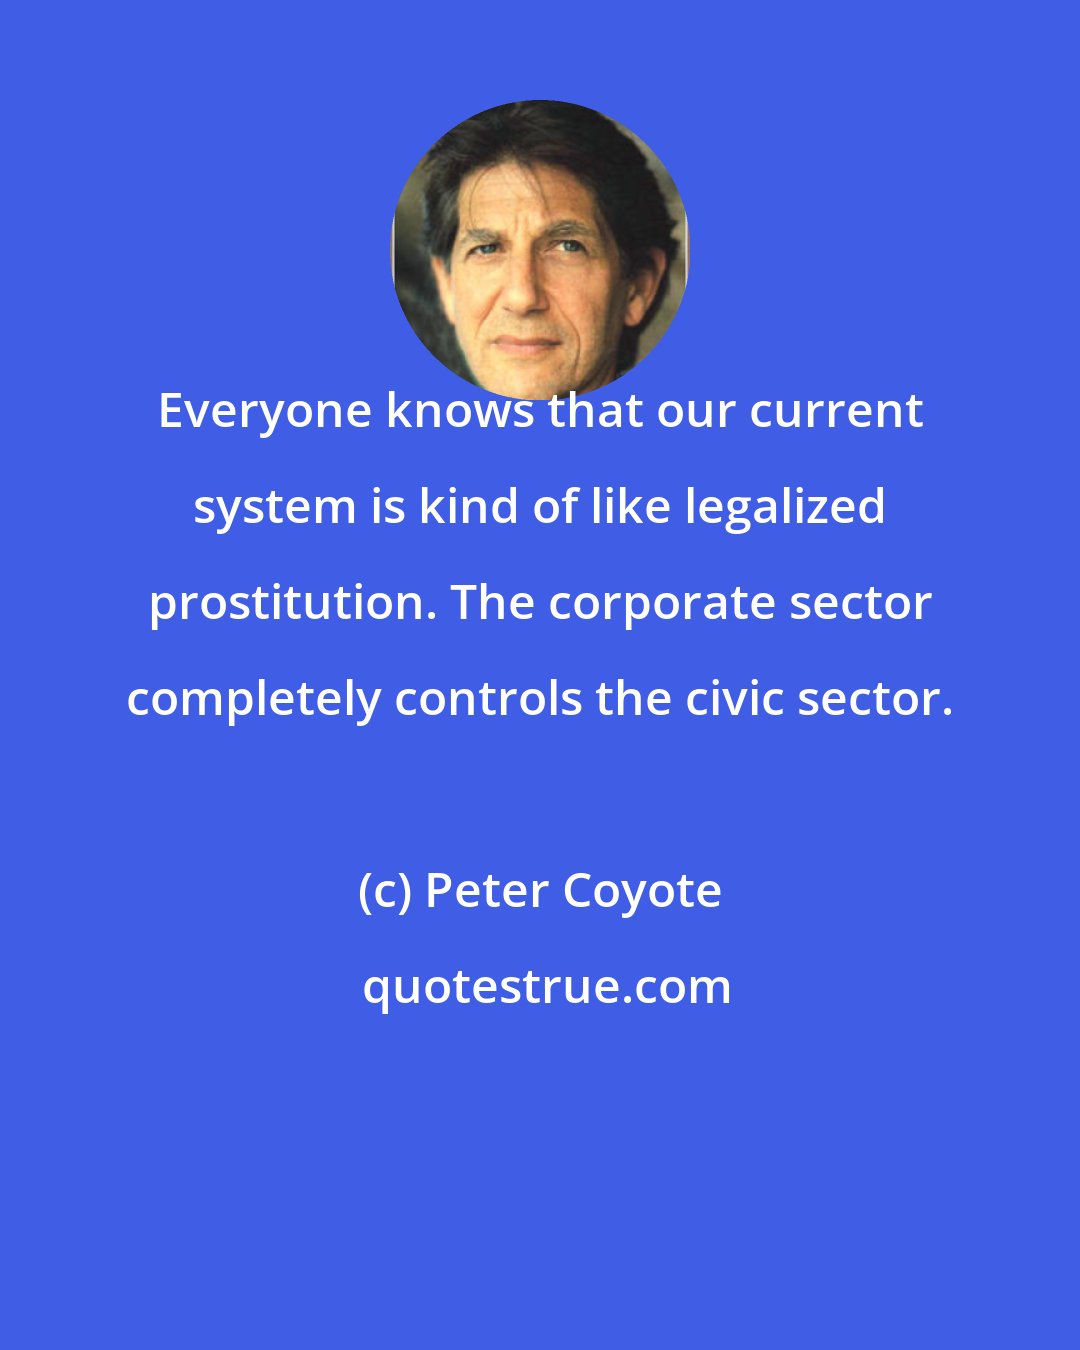 Peter Coyote: Everyone knows that our current system is kind of like legalized prostitution. The corporate sector completely controls the civic sector.